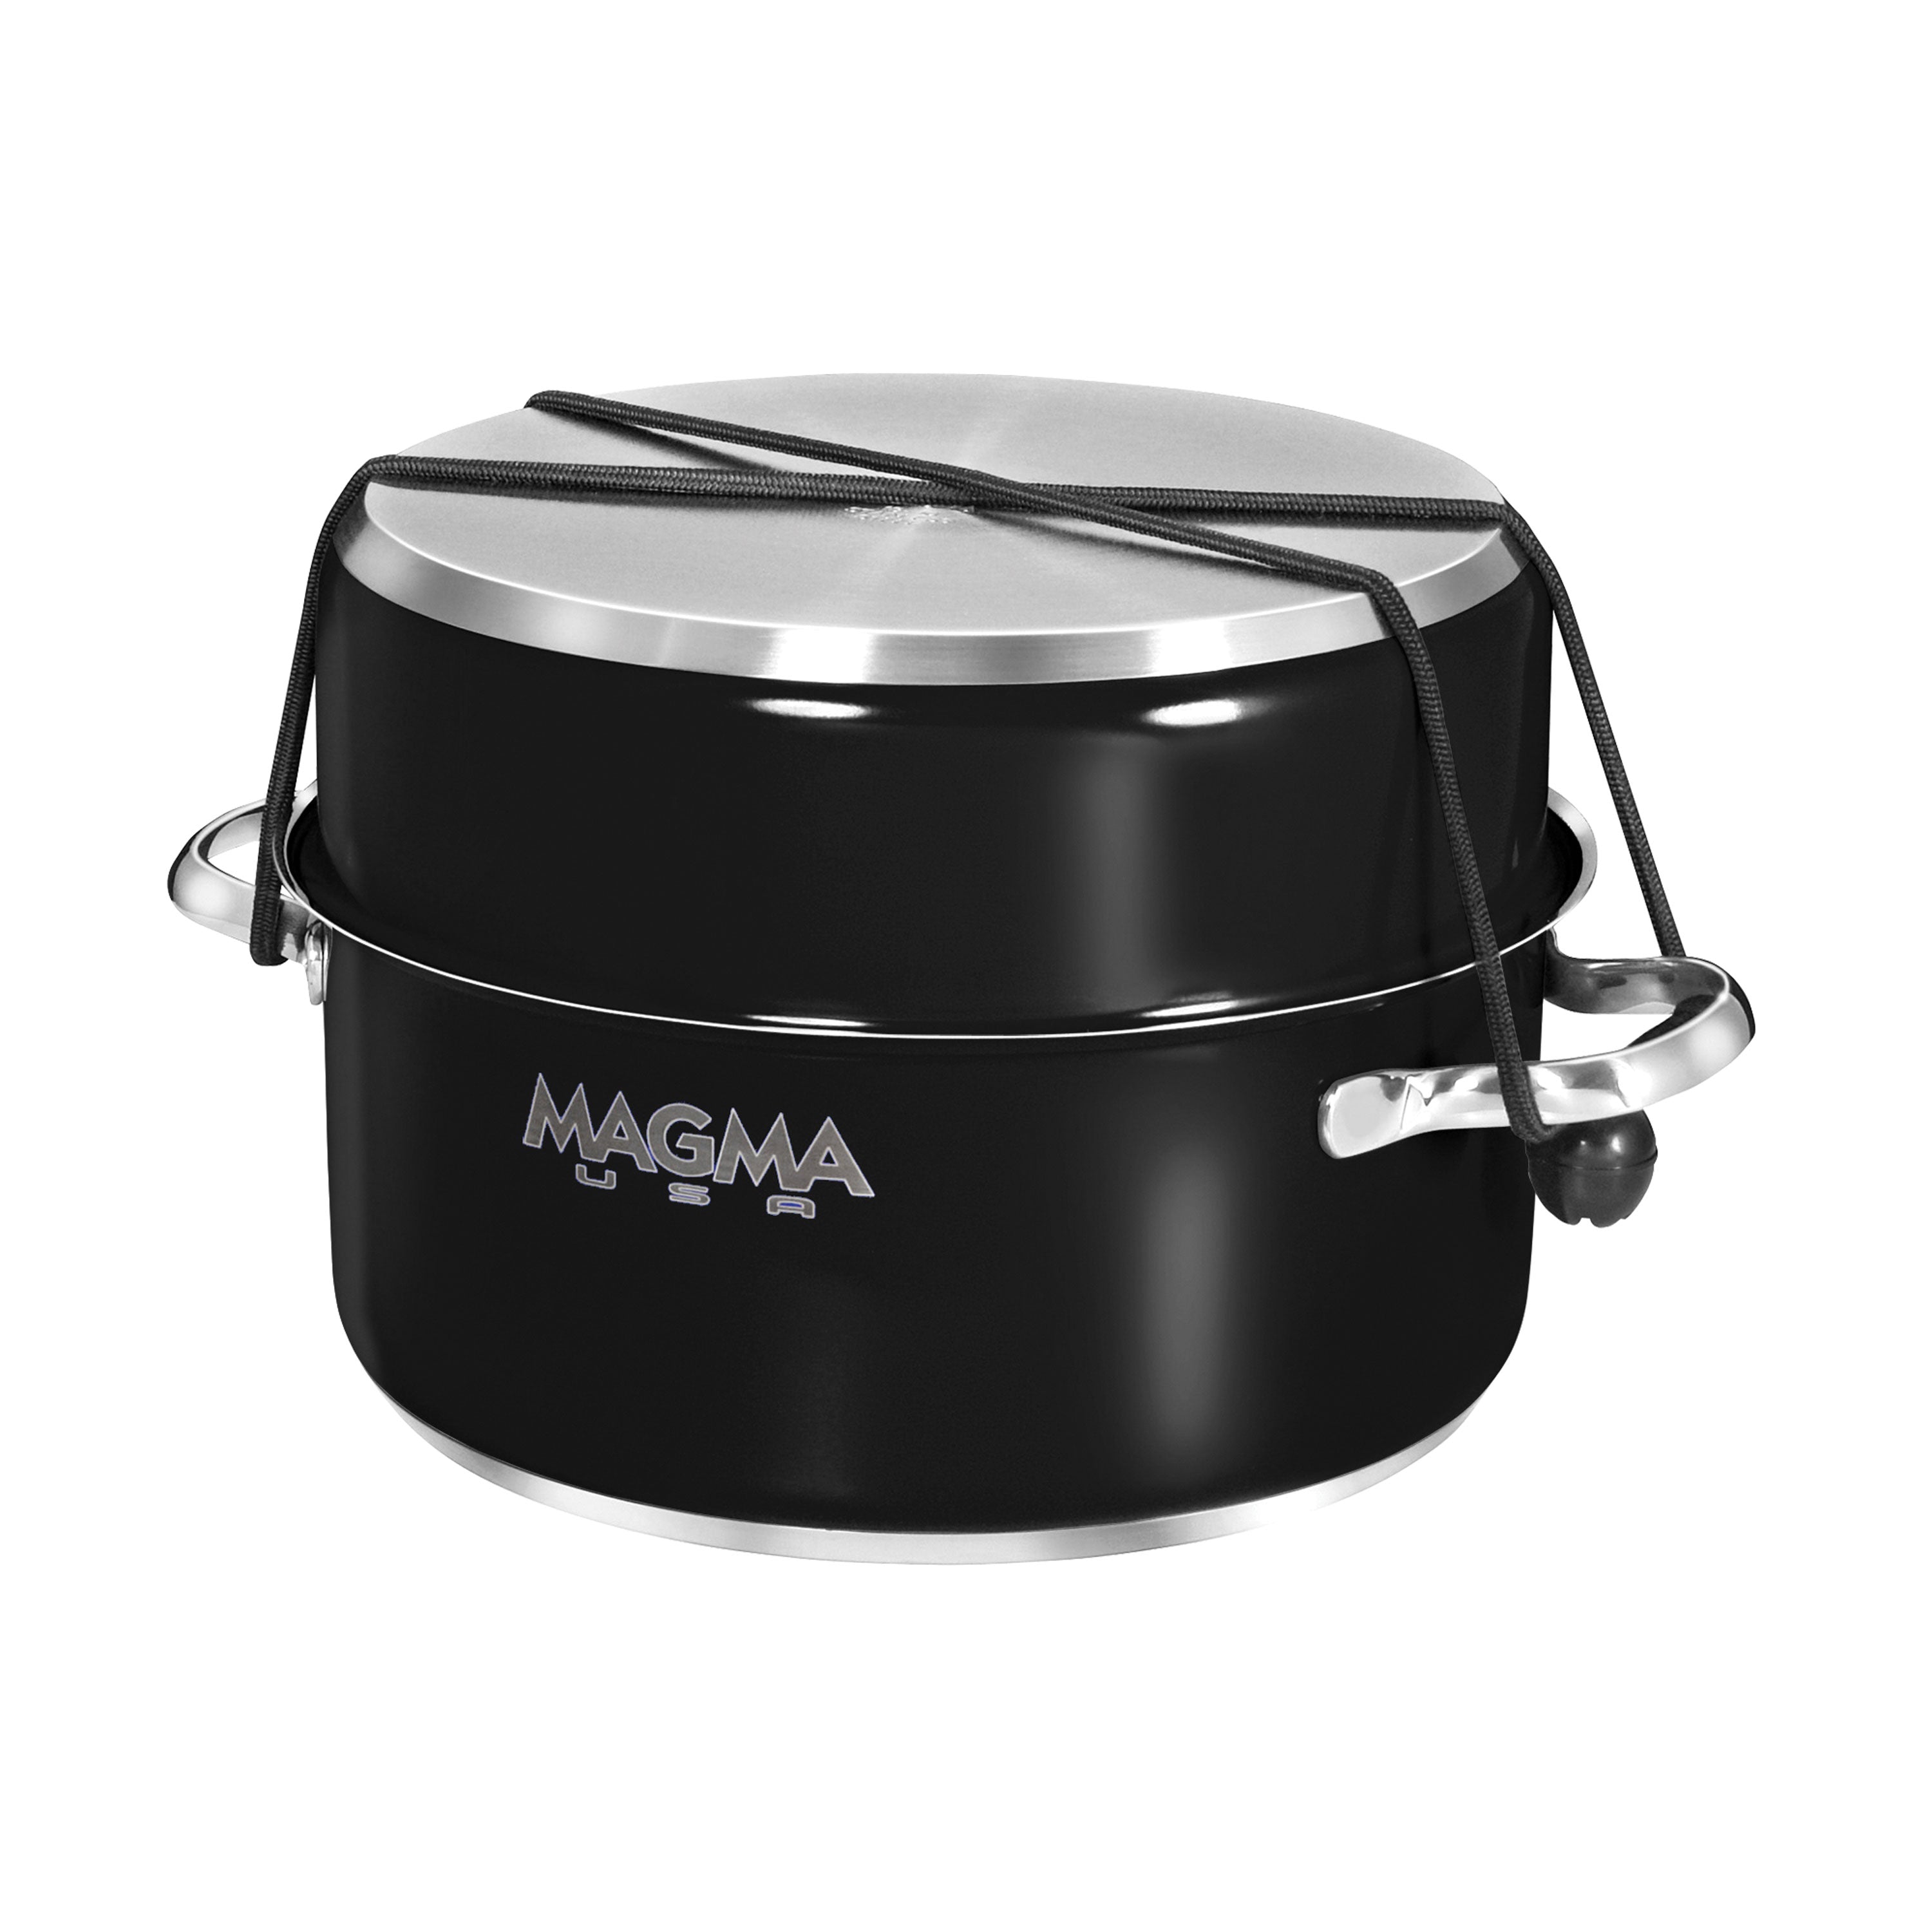 Magma A10-366-JB-2-IN Cookware - 10 PC Set, Non-Stick